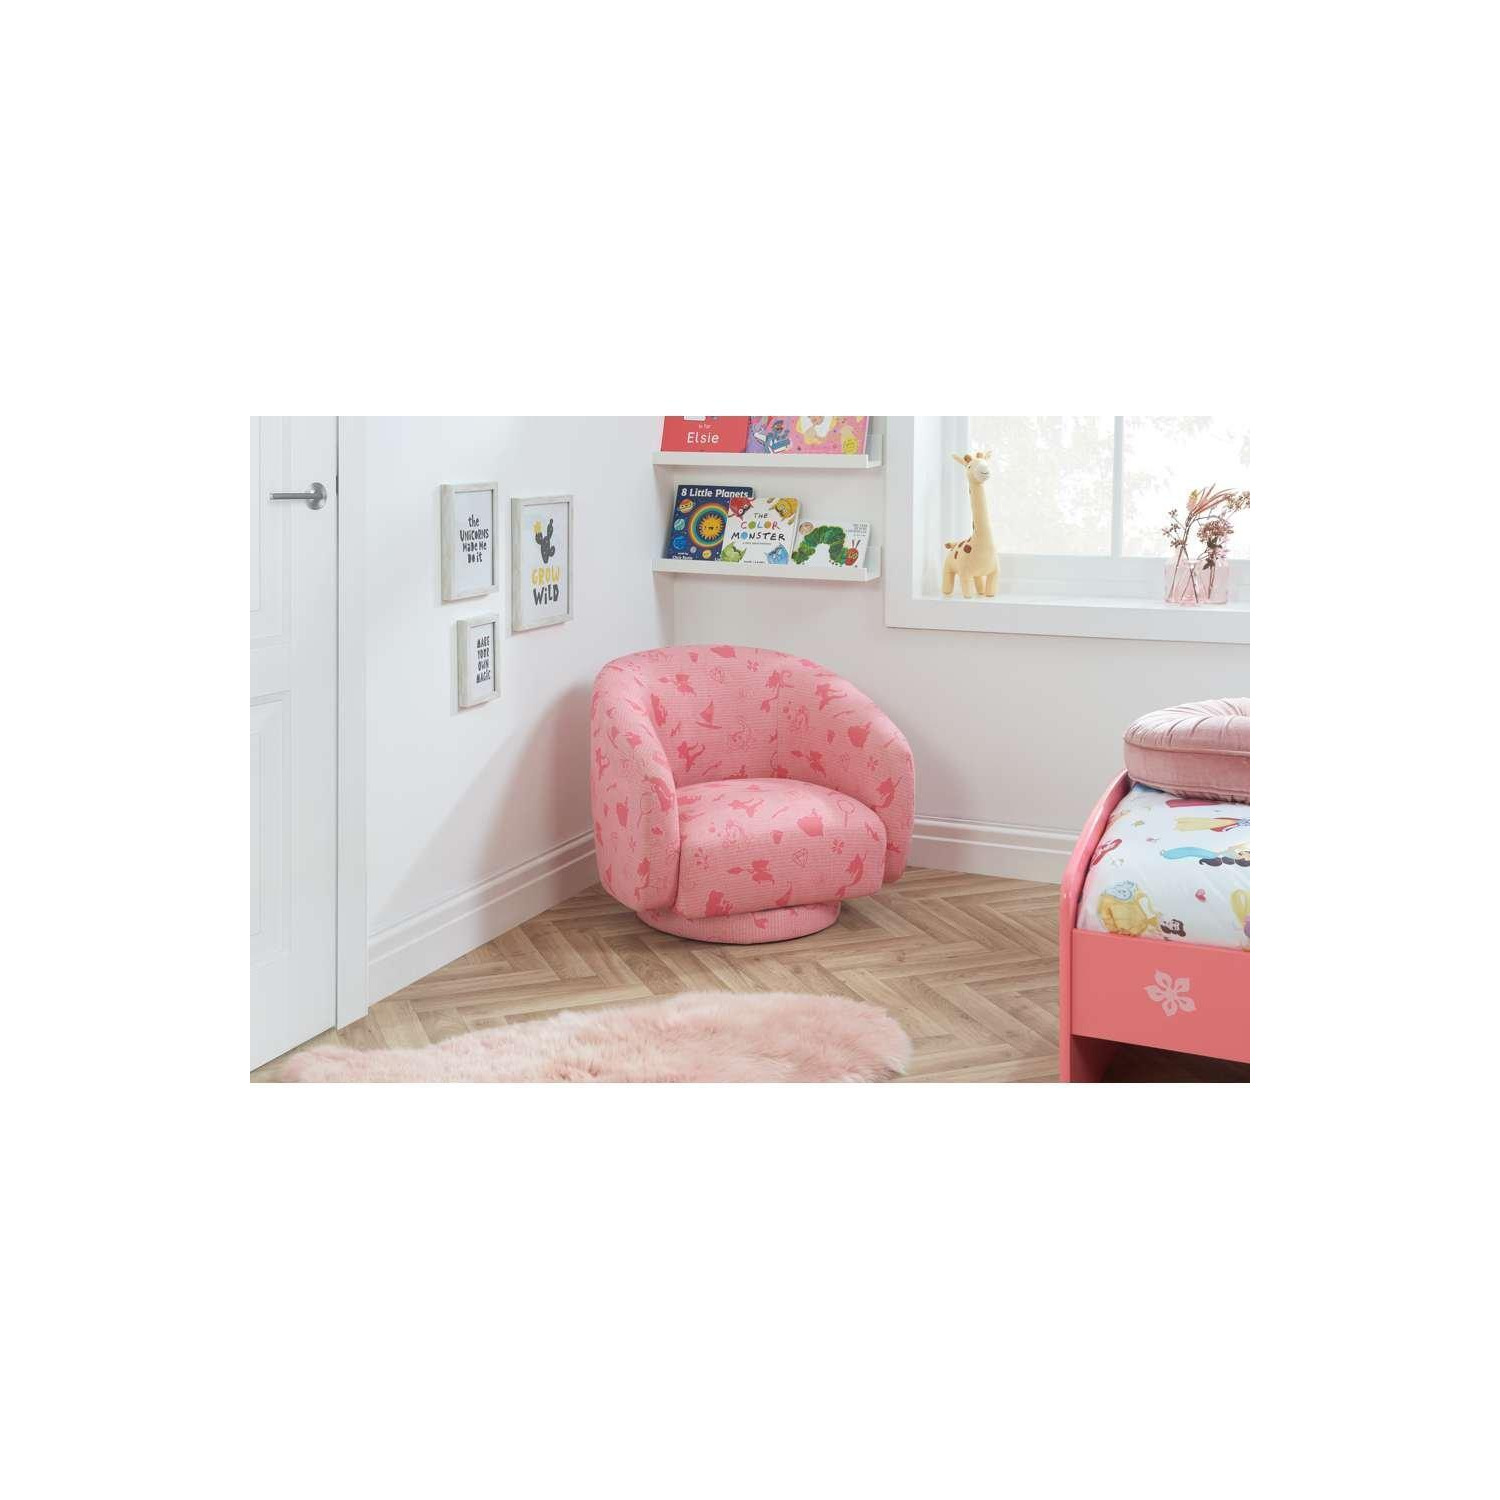 Official Disney Childrens Princess Accent Swivel Chair Pink Upholstered Fabric - image 1